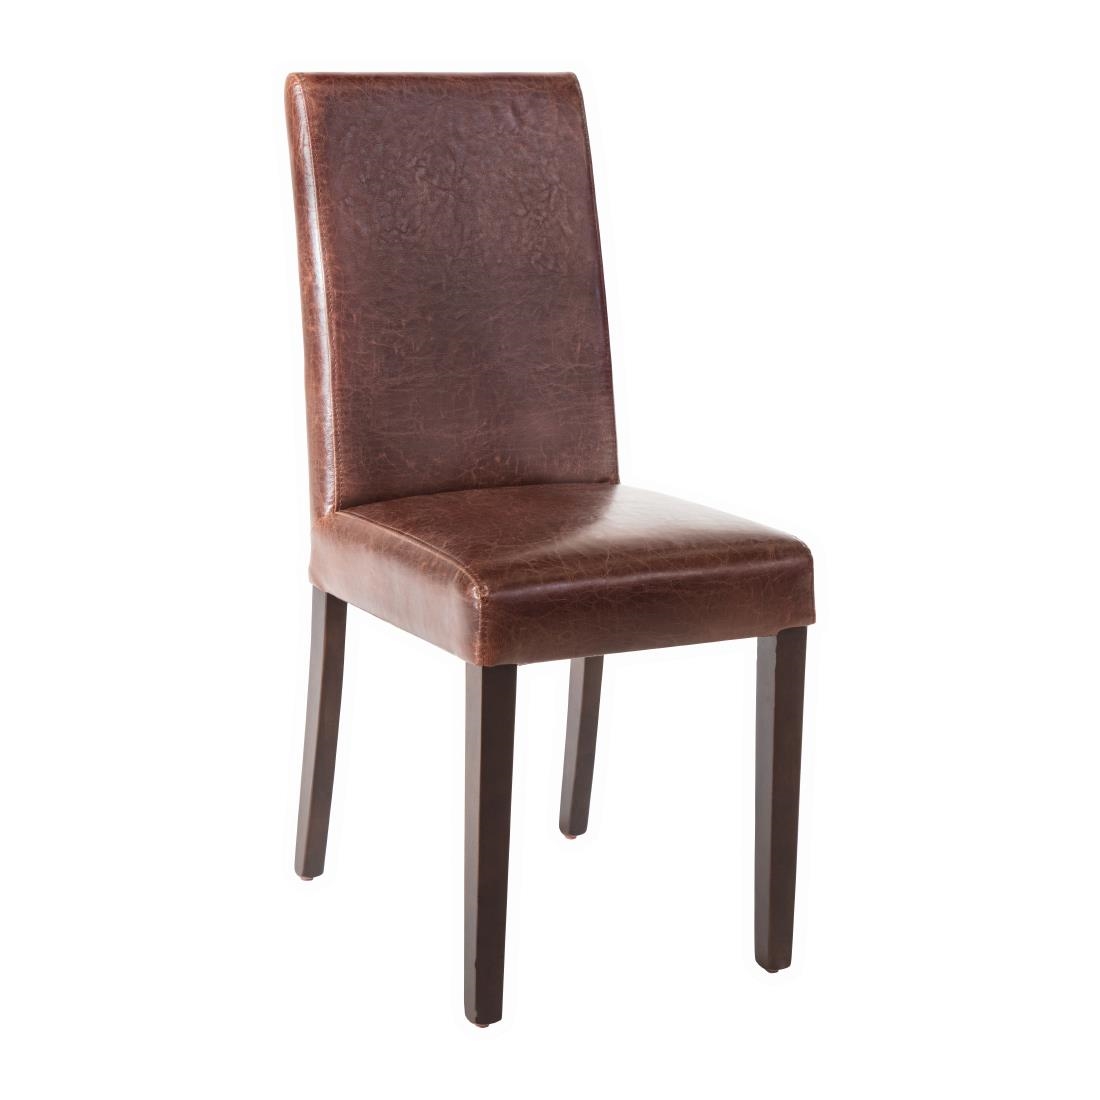 Faux Leather Dining Chair - Antique Brown